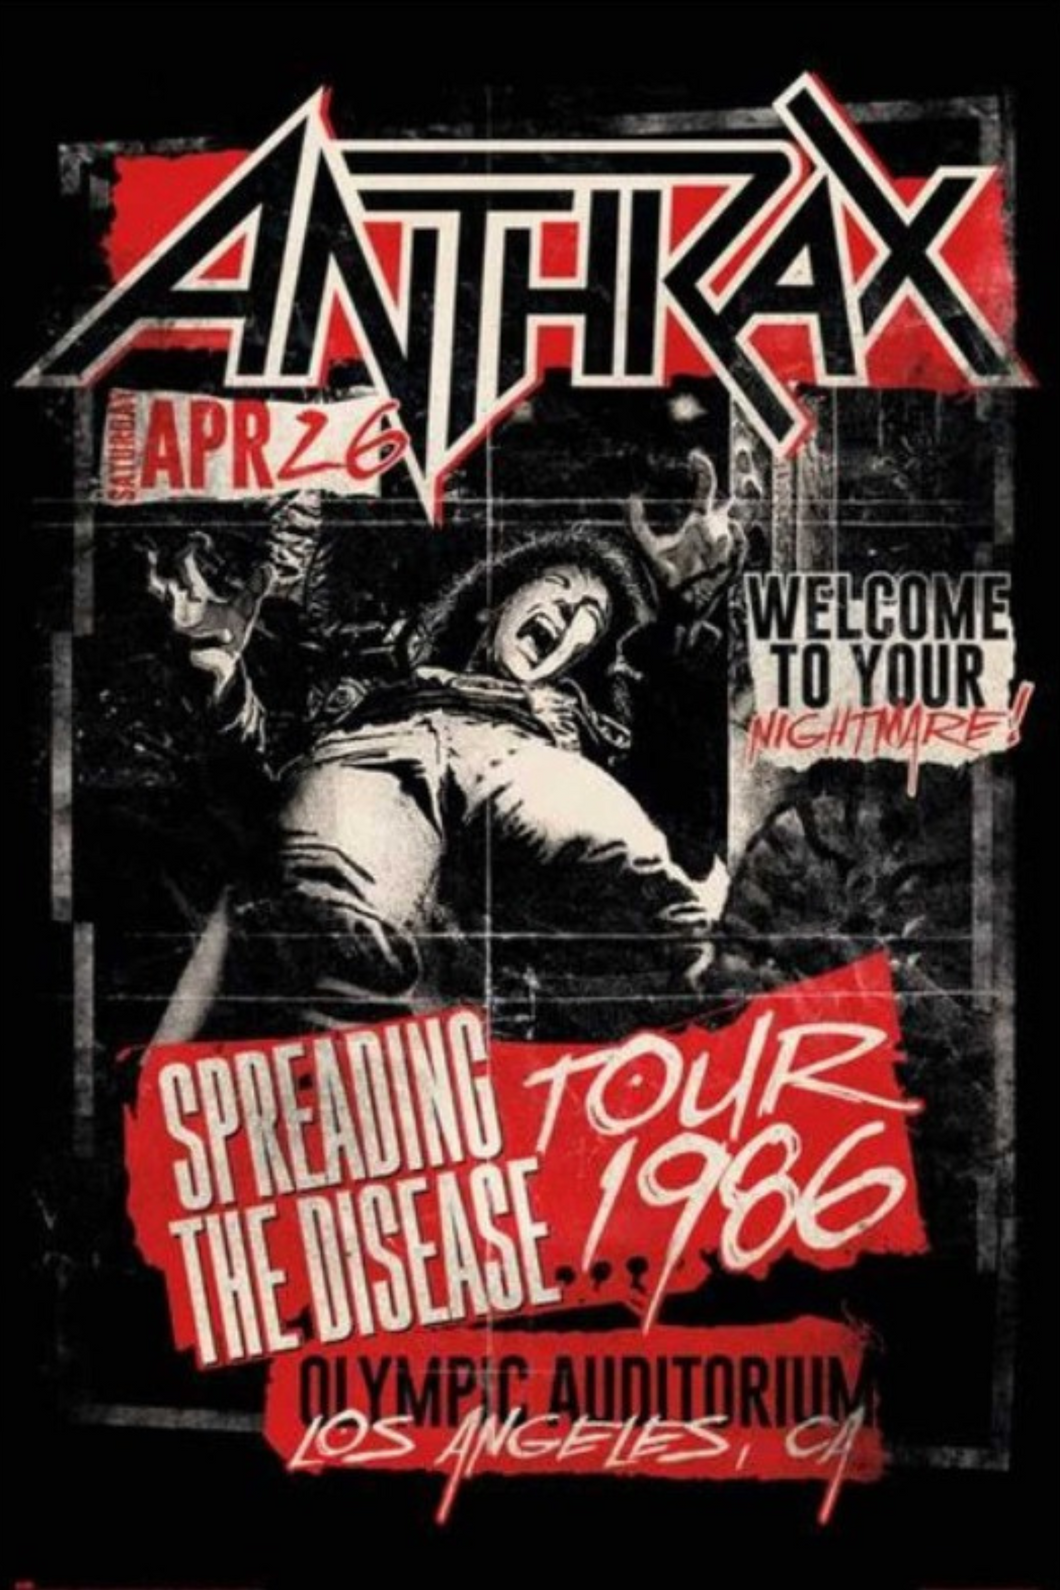 Anthrax Spreading the Disease Poster